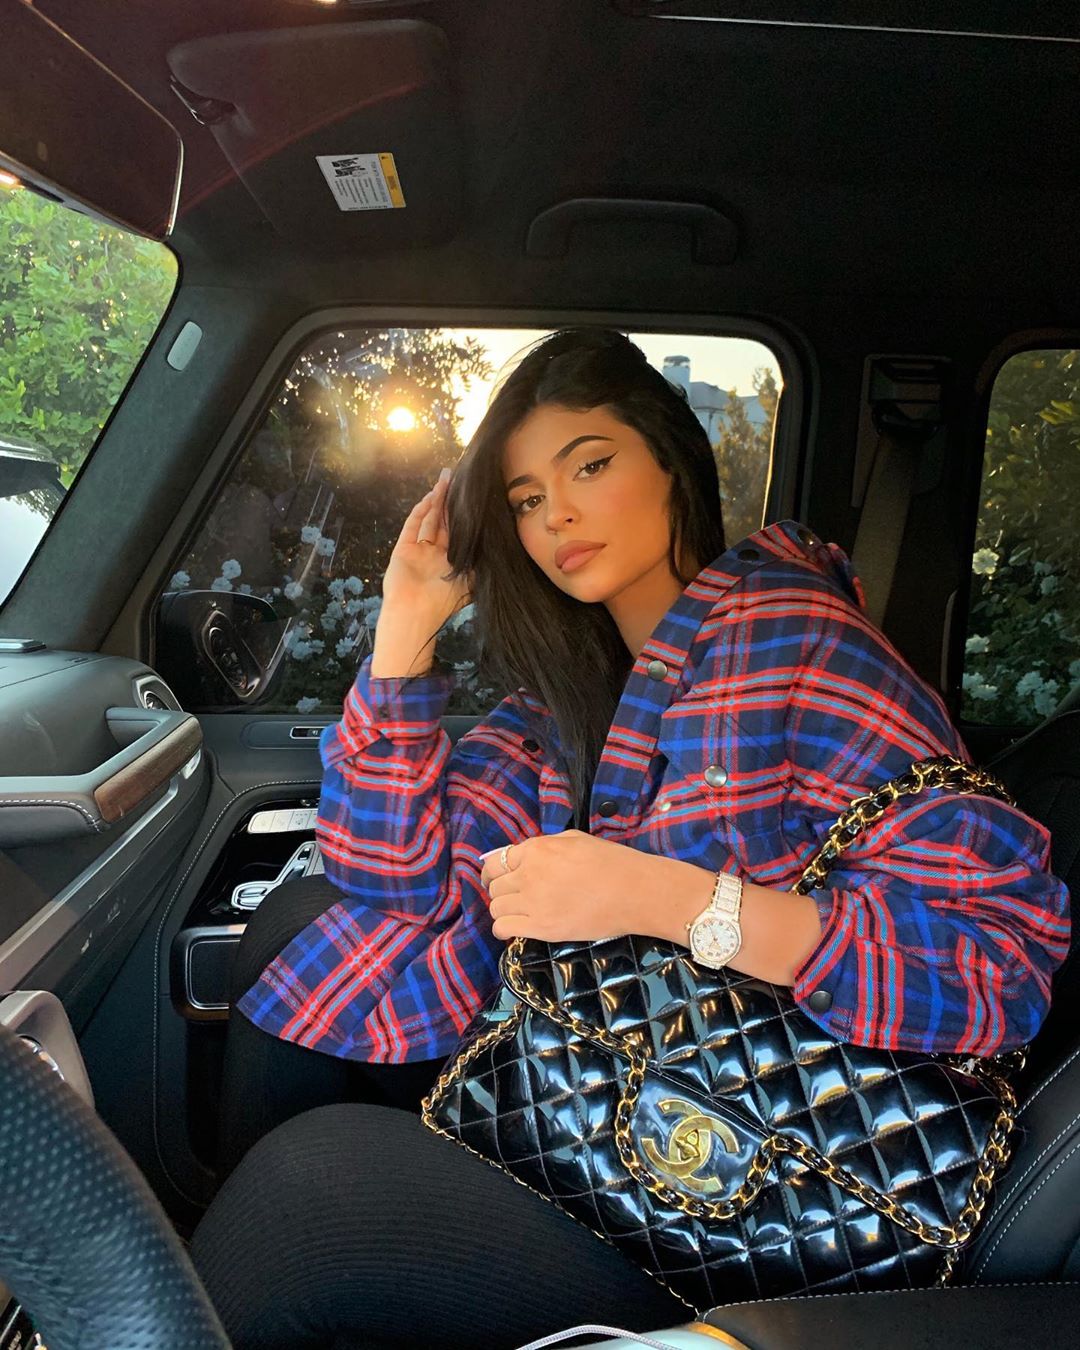 Kylie Jenner's Vintage Chanel Accessories in the Snow